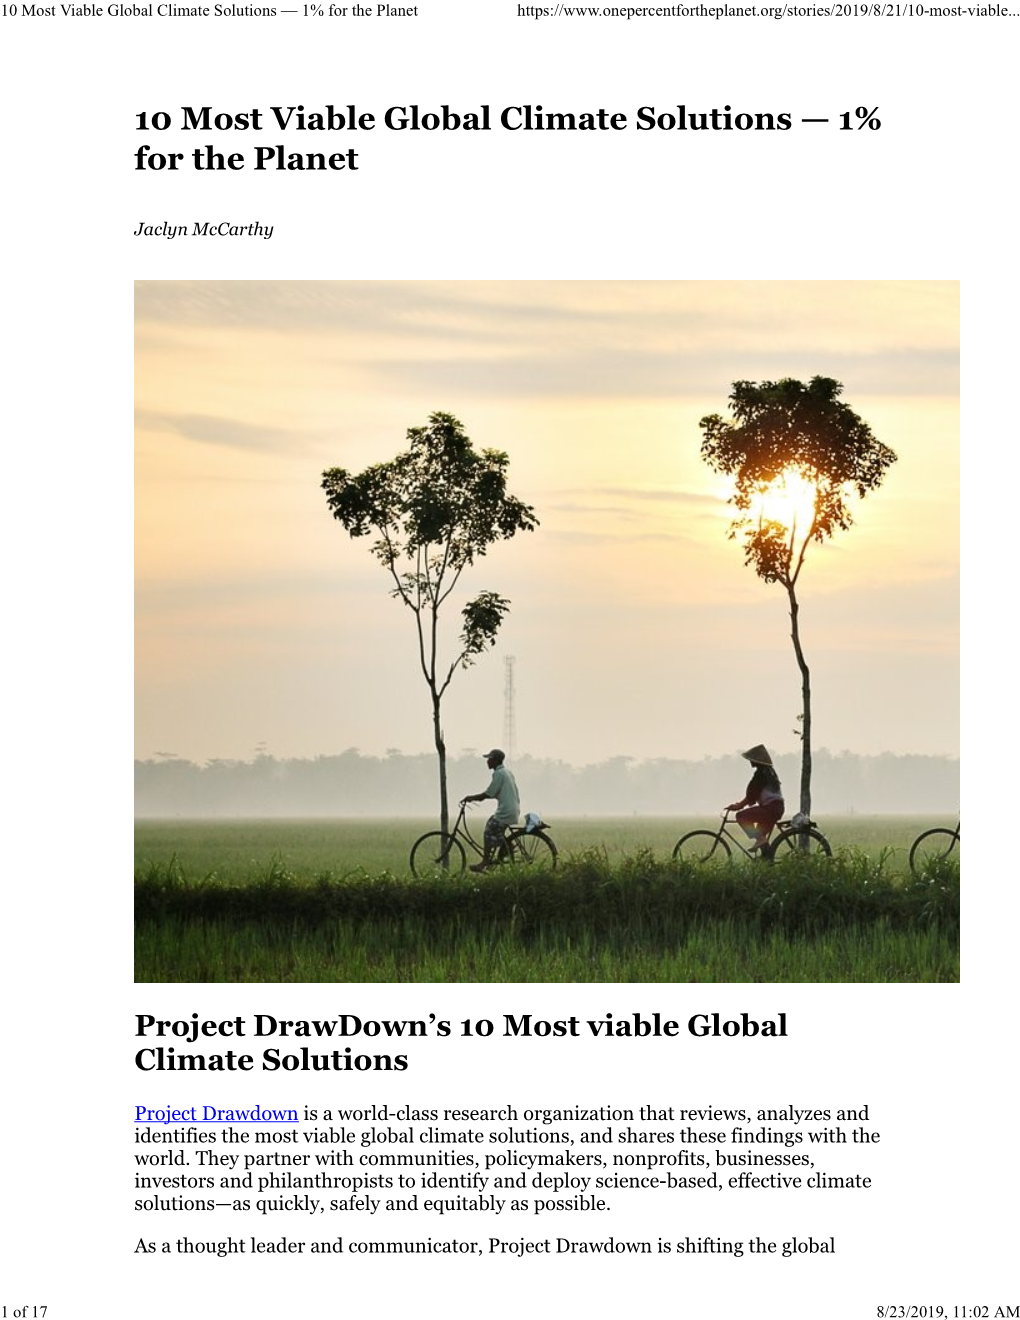 10 Most Viable Global Climate Solutions — 1% for the Planet